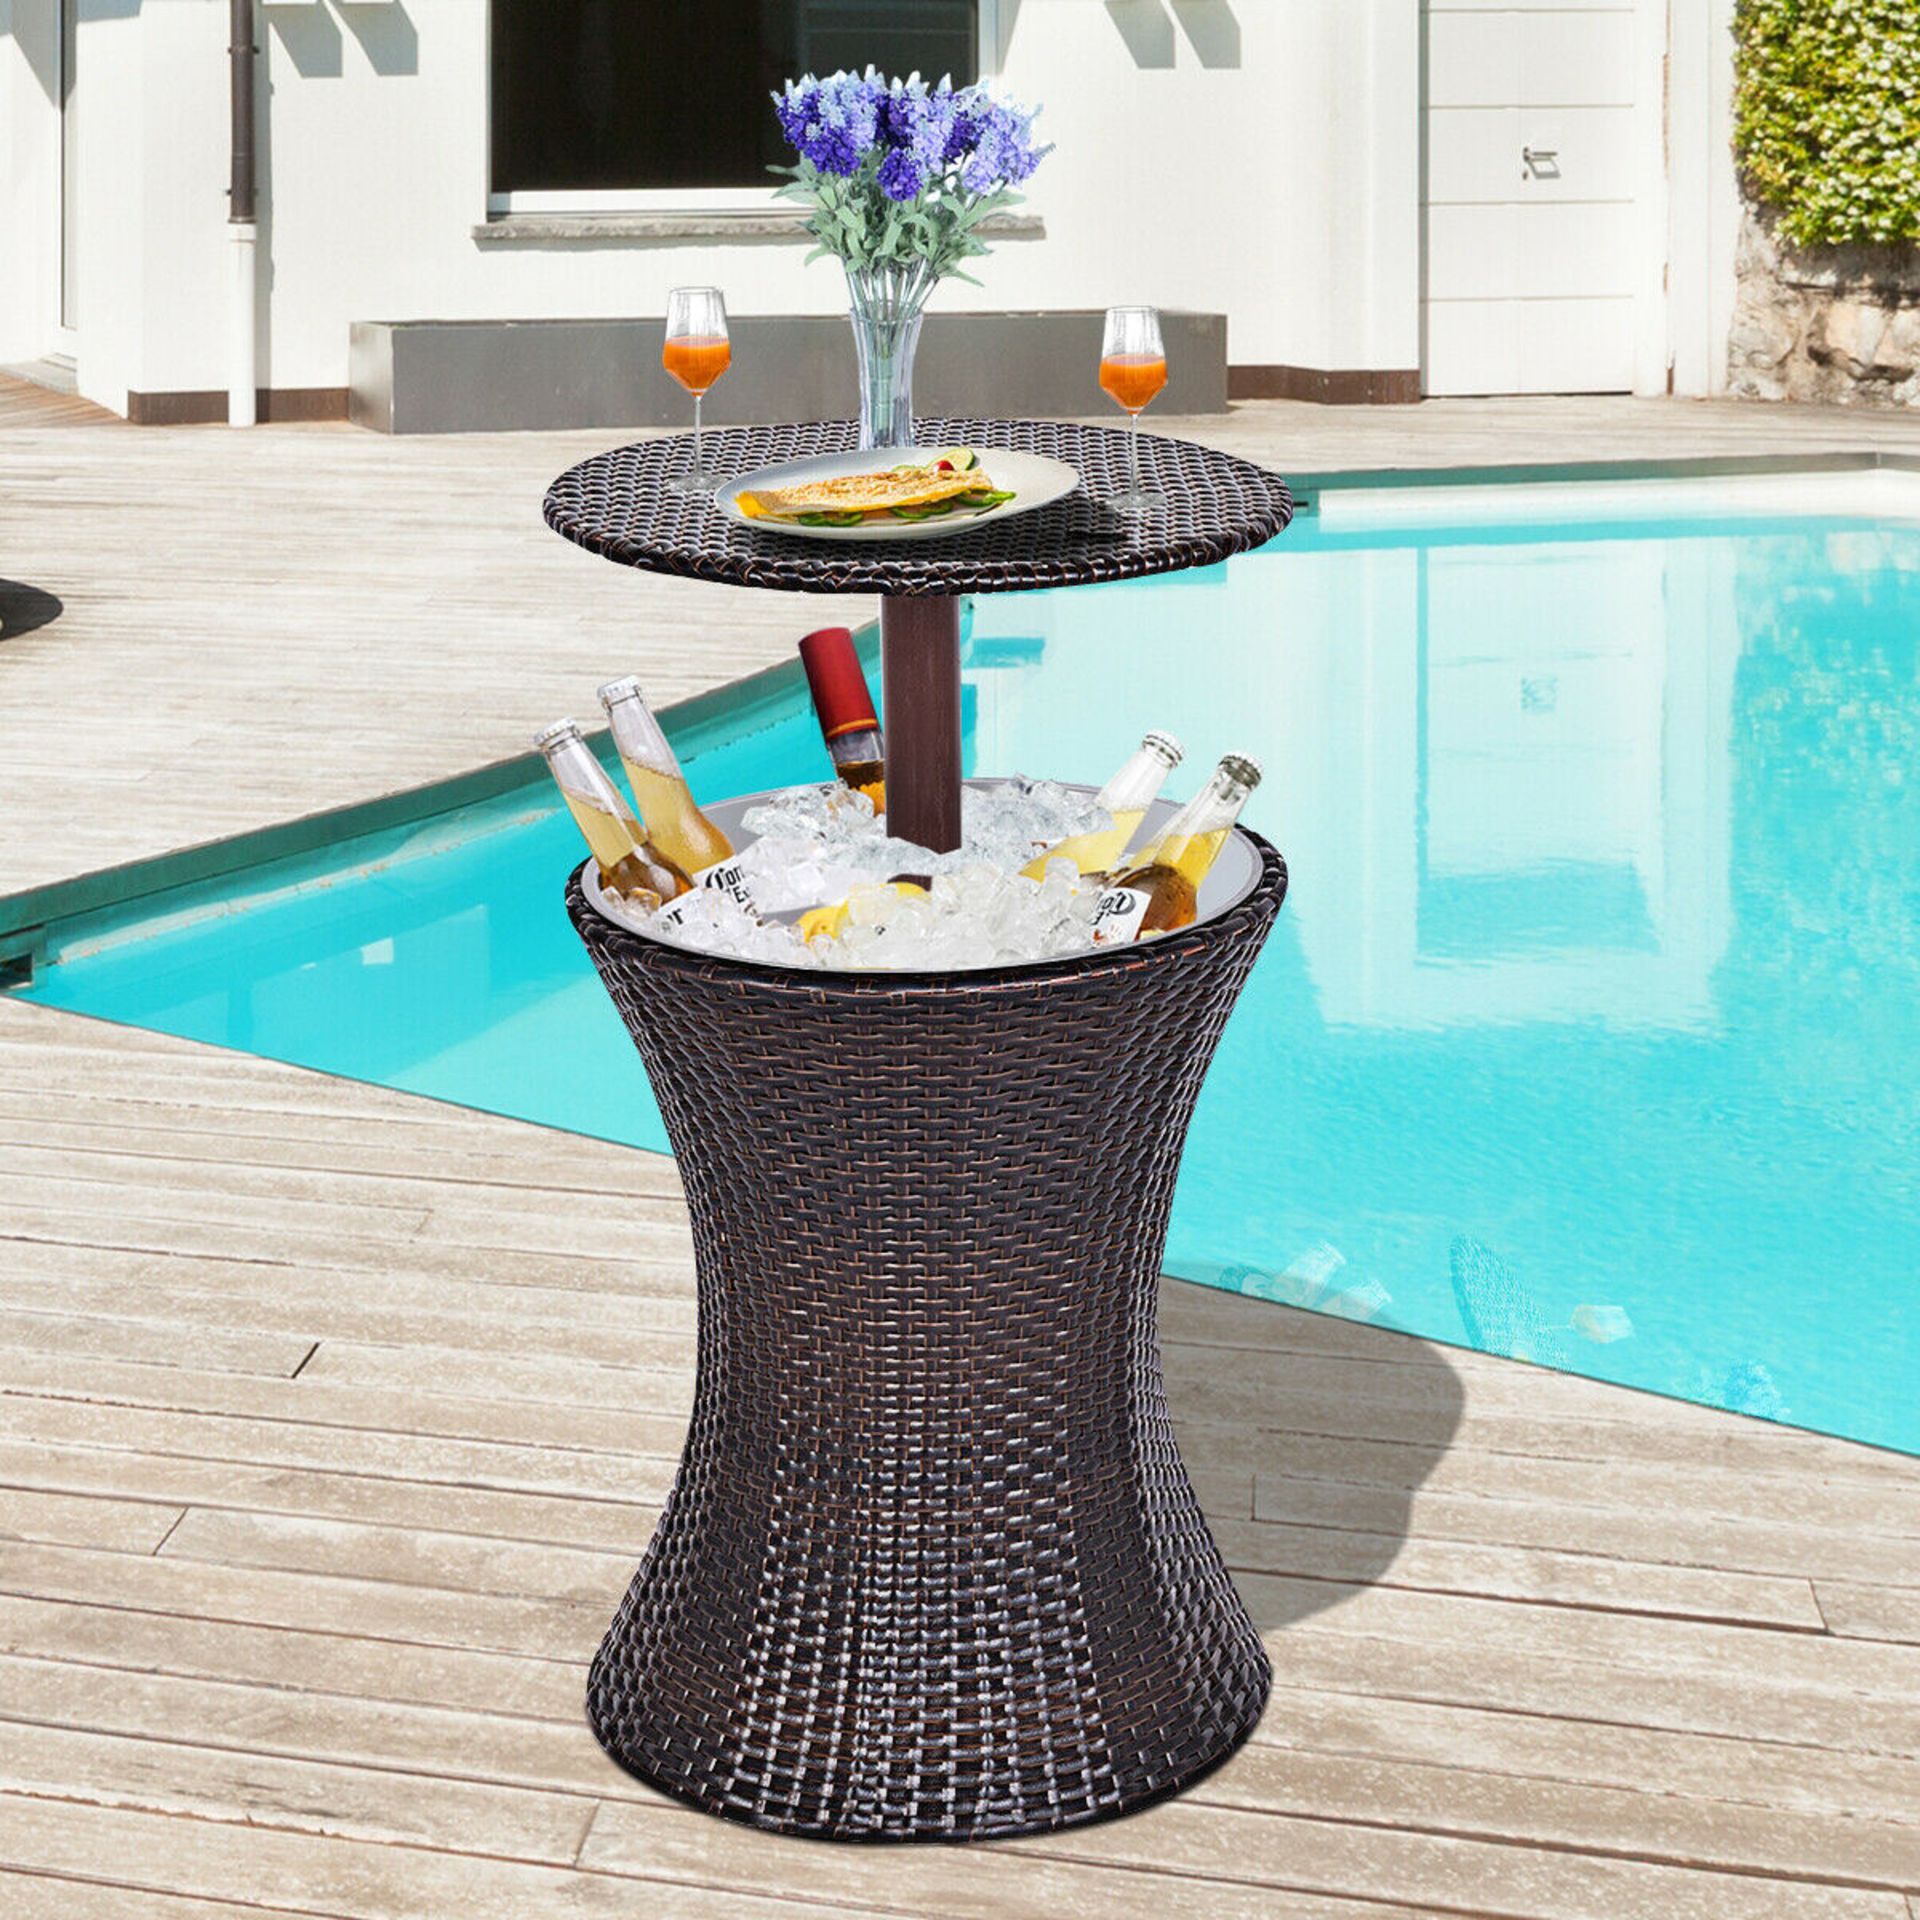 + VAT Brand New The Chelsea Garden Company Brown Rattan Bar Table With Ice Cooler - Patio Cooler - Image 3 of 3